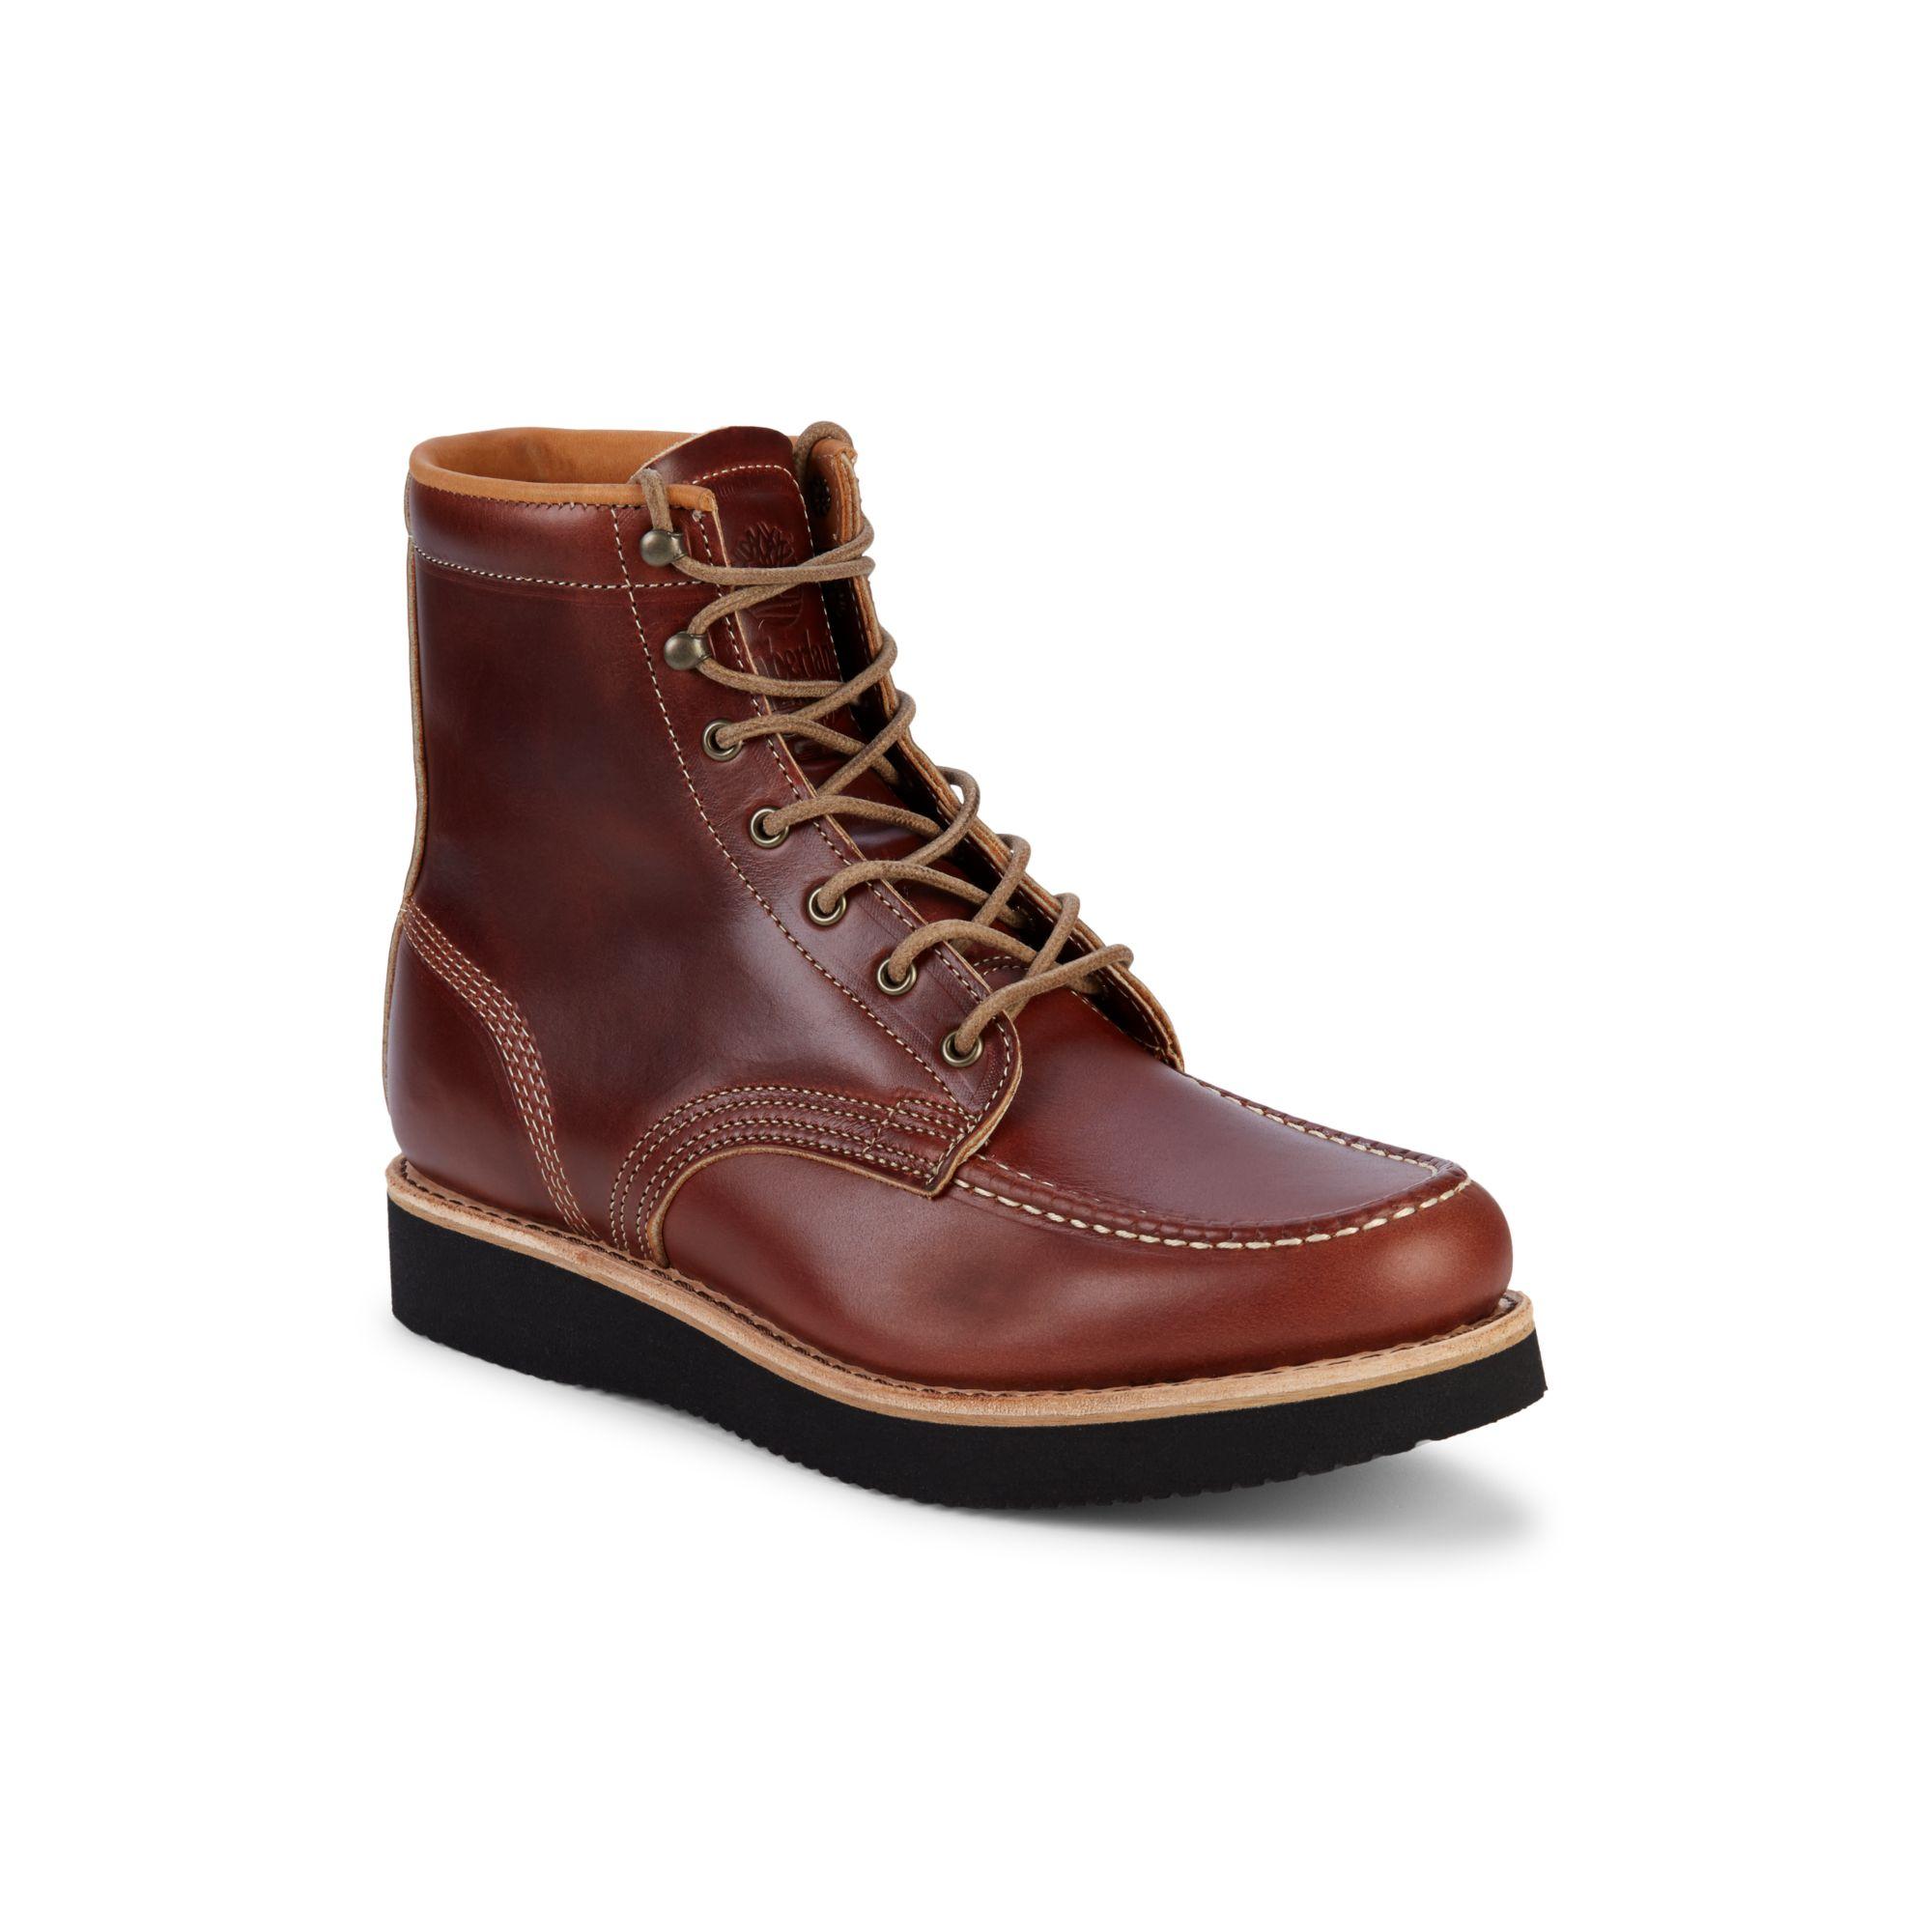 Timberland American Craft Moc toe Leather Boots in Brown for Men